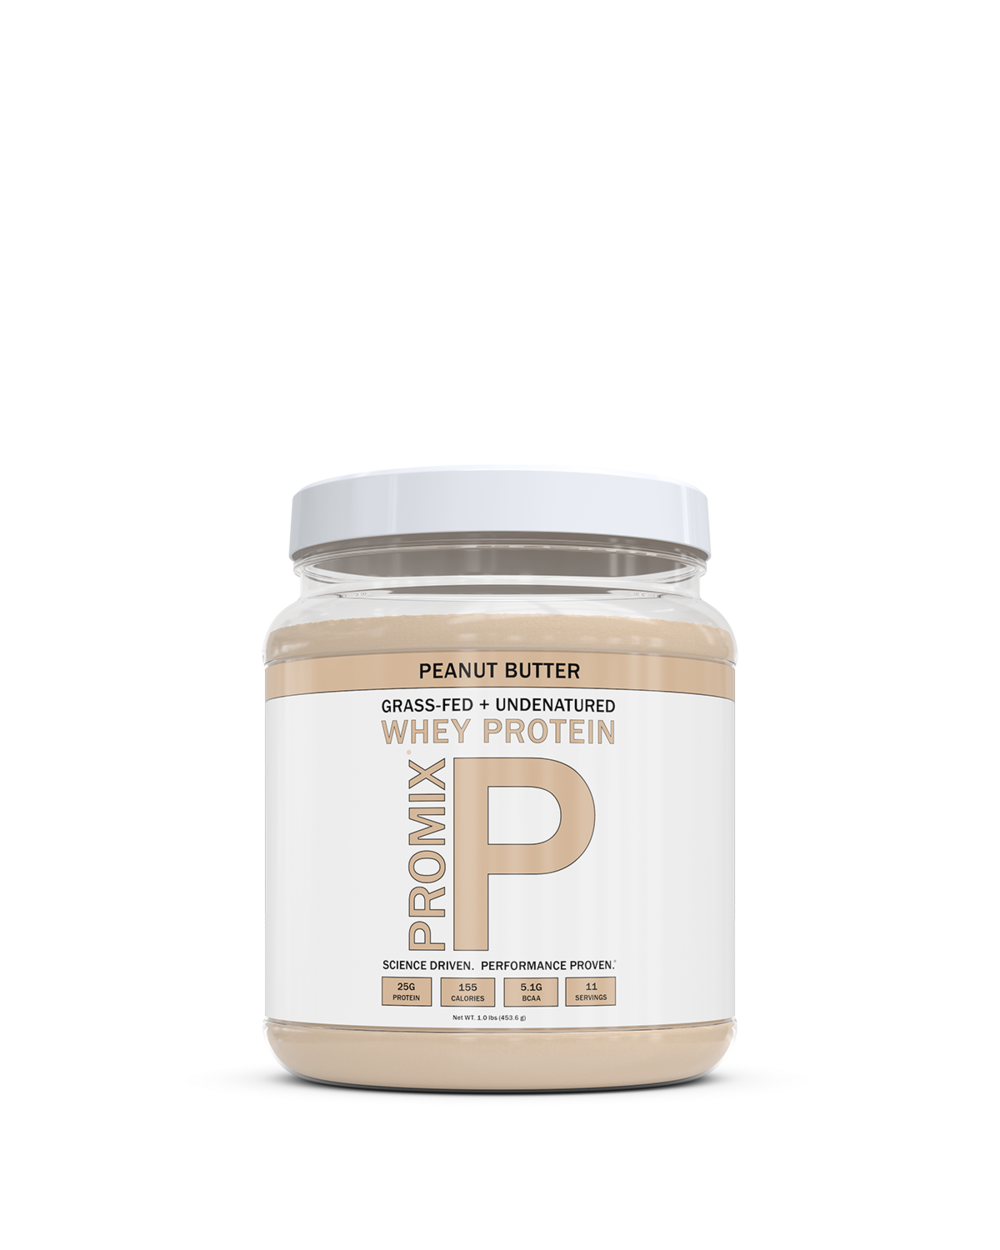 Peanut Butter Whey Protein Powder, Size: 1 LB